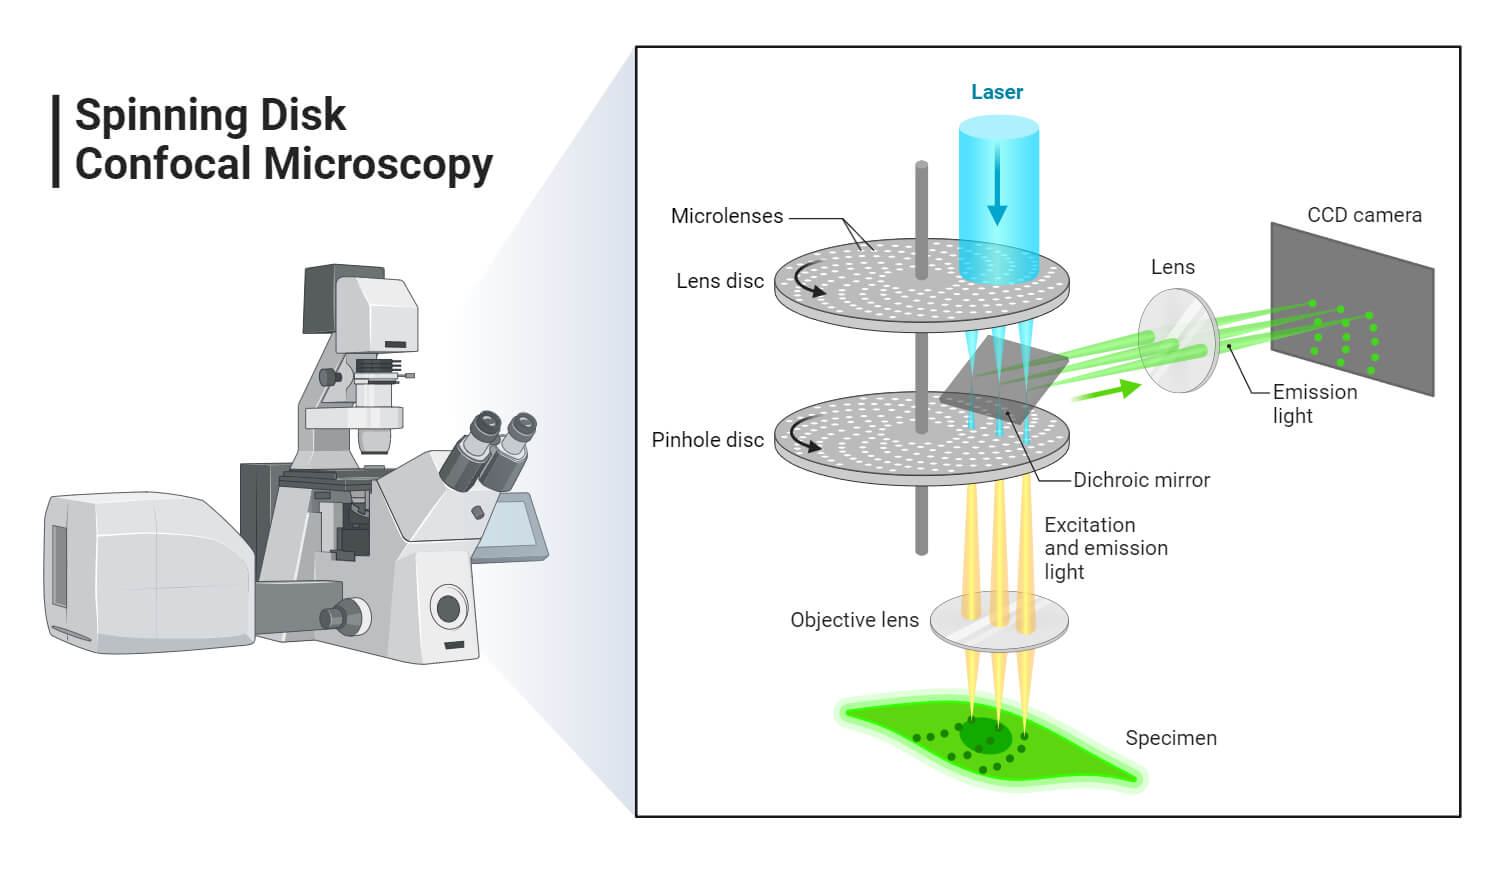 Spinning Disk Confocal Microscopy